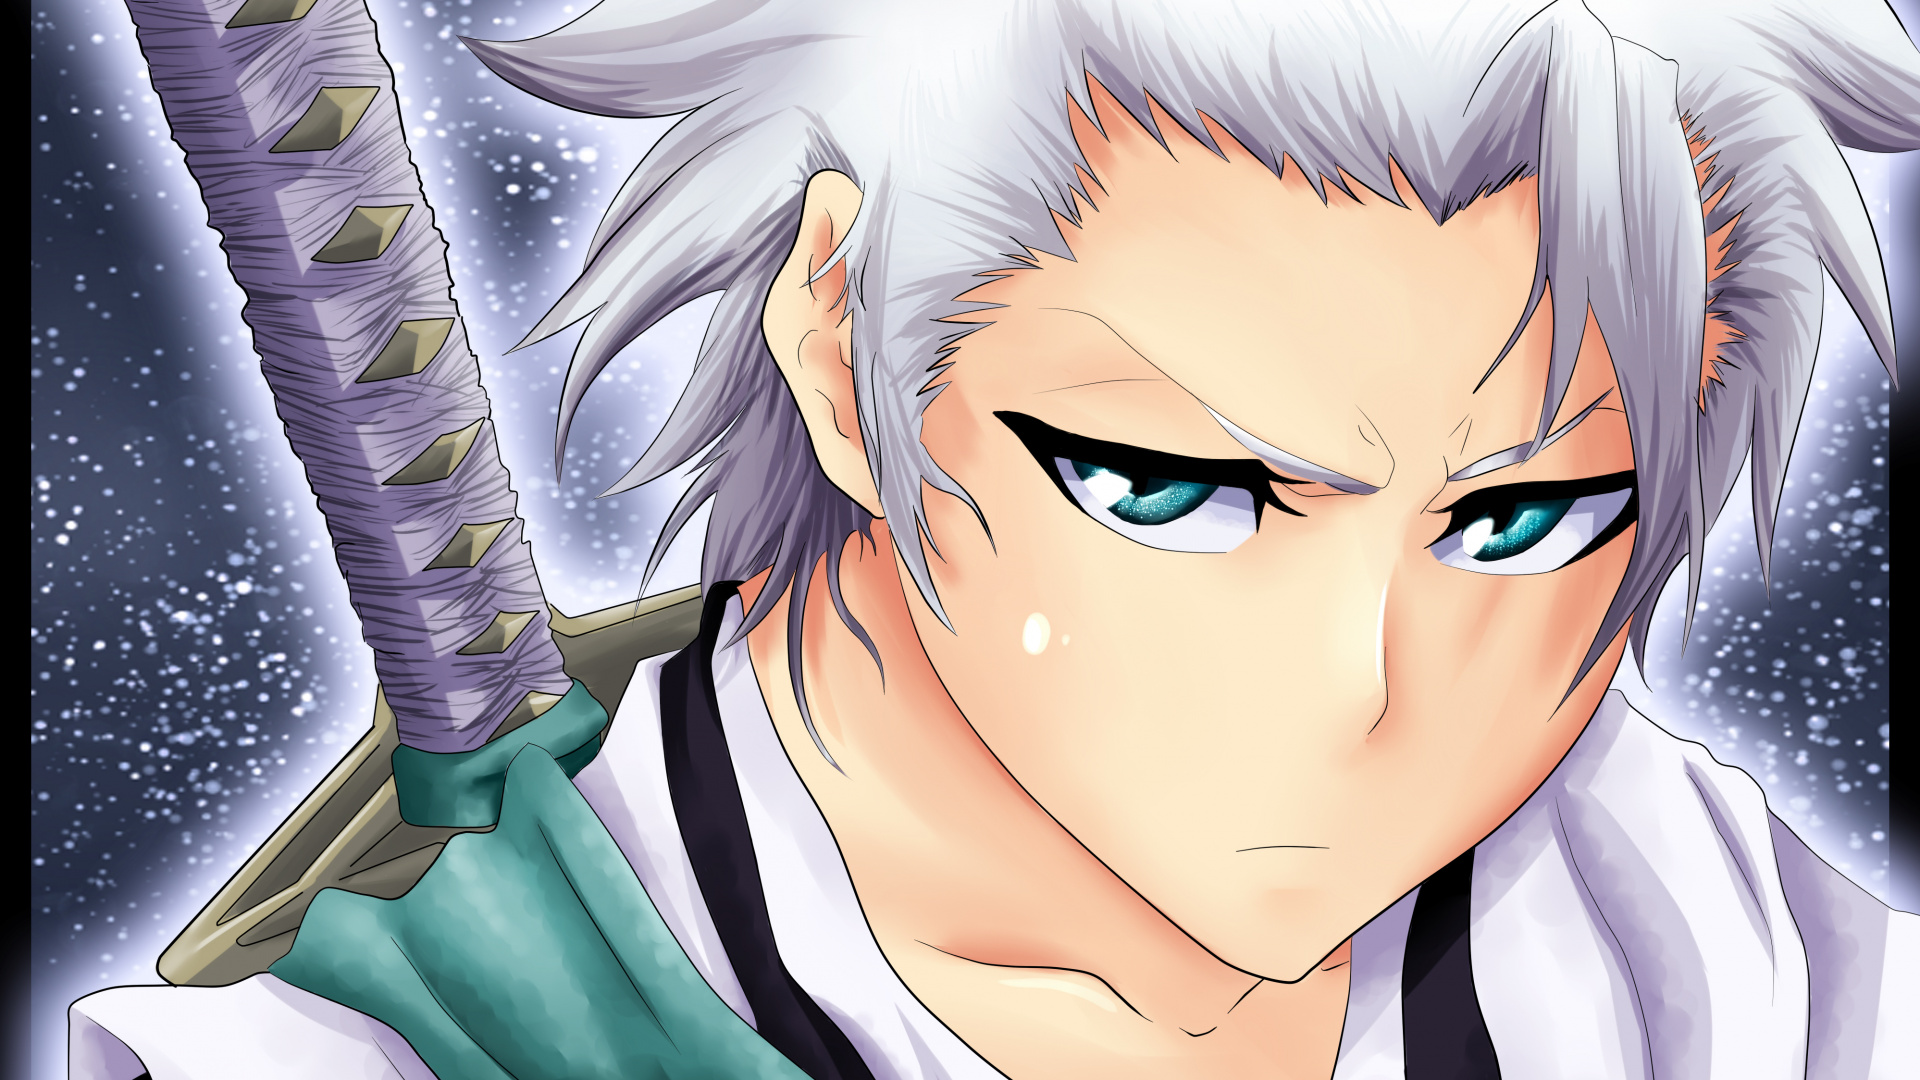 Personnage D'anime Masculin Aux Cheveux Bruns. Wallpaper in 1920x1080 Resolution